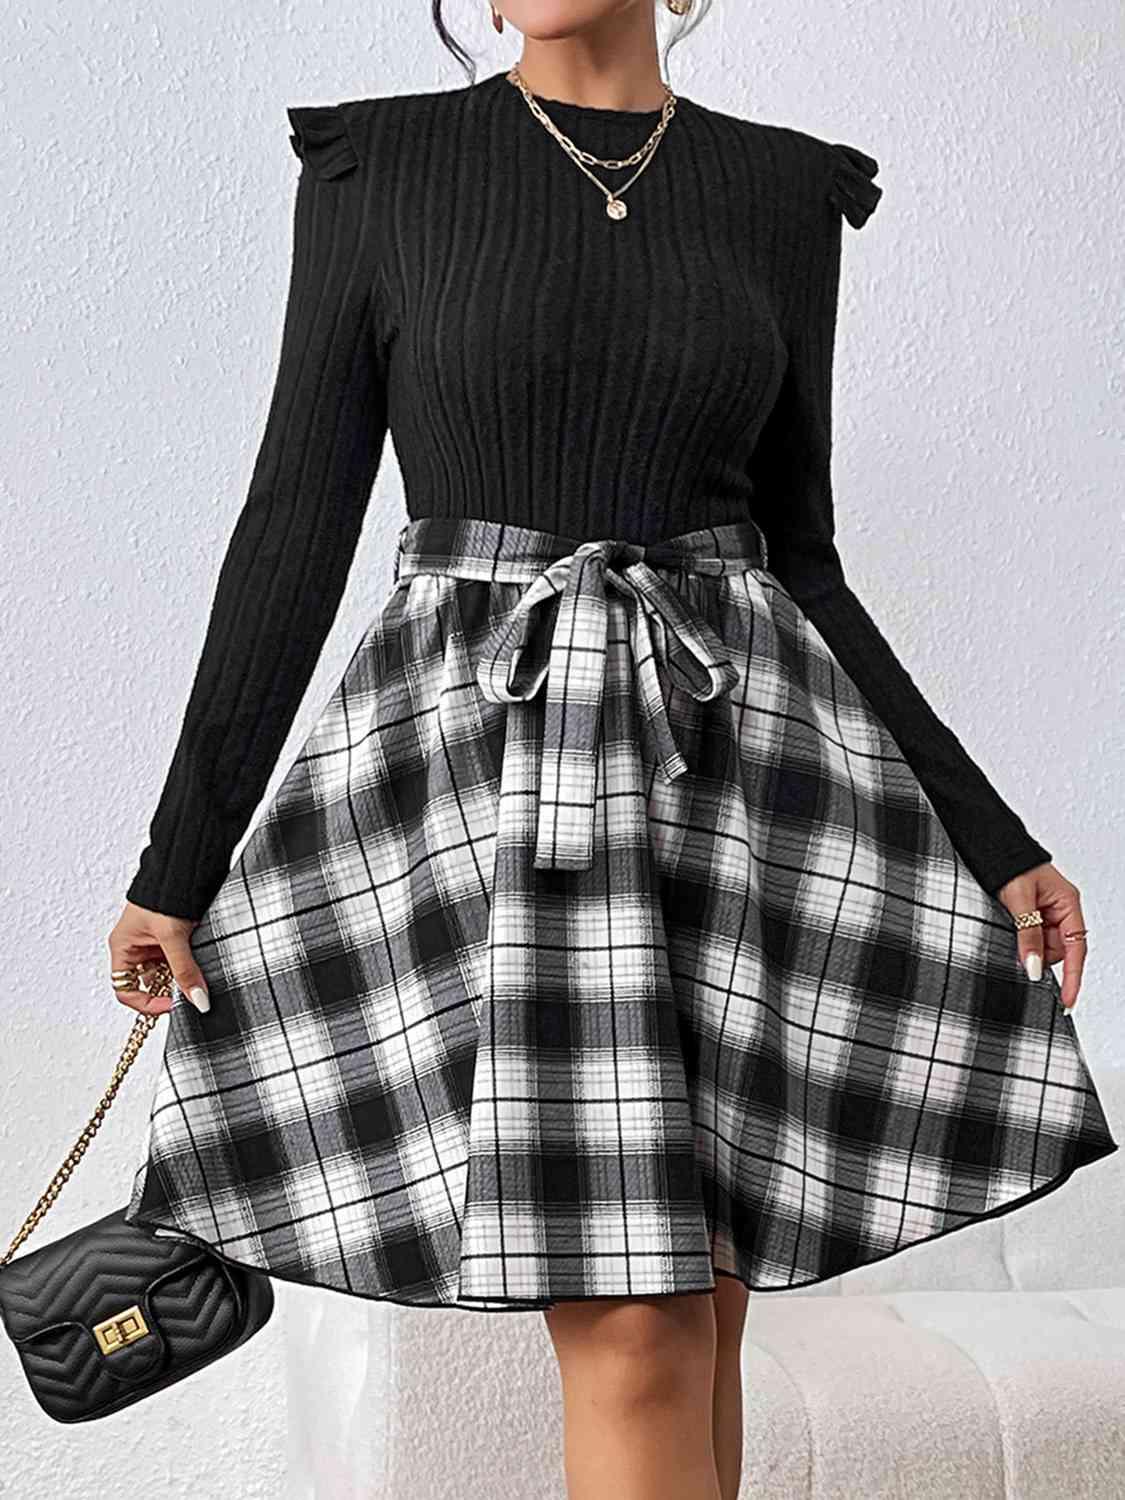 a woman wearing a black and white plaid skirt